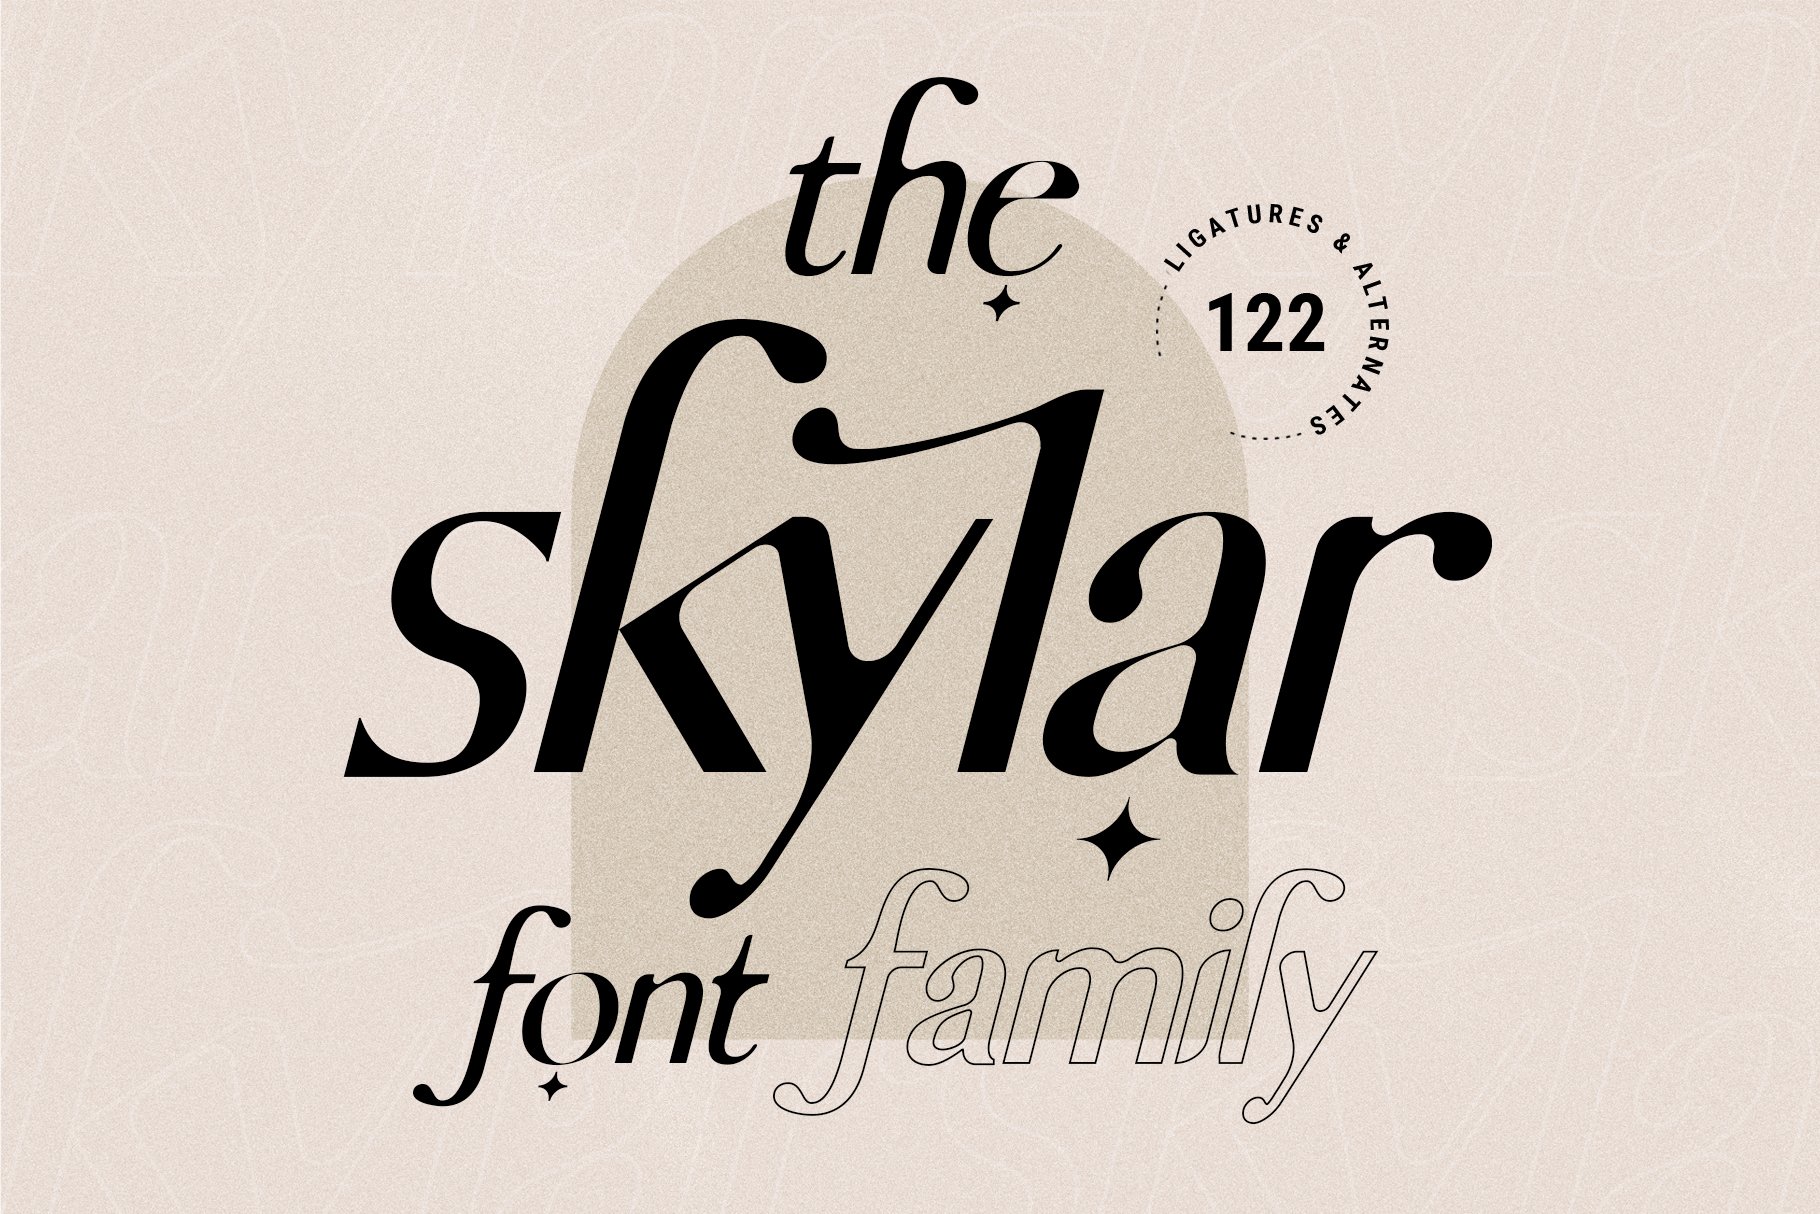 So creative and interesting font design.